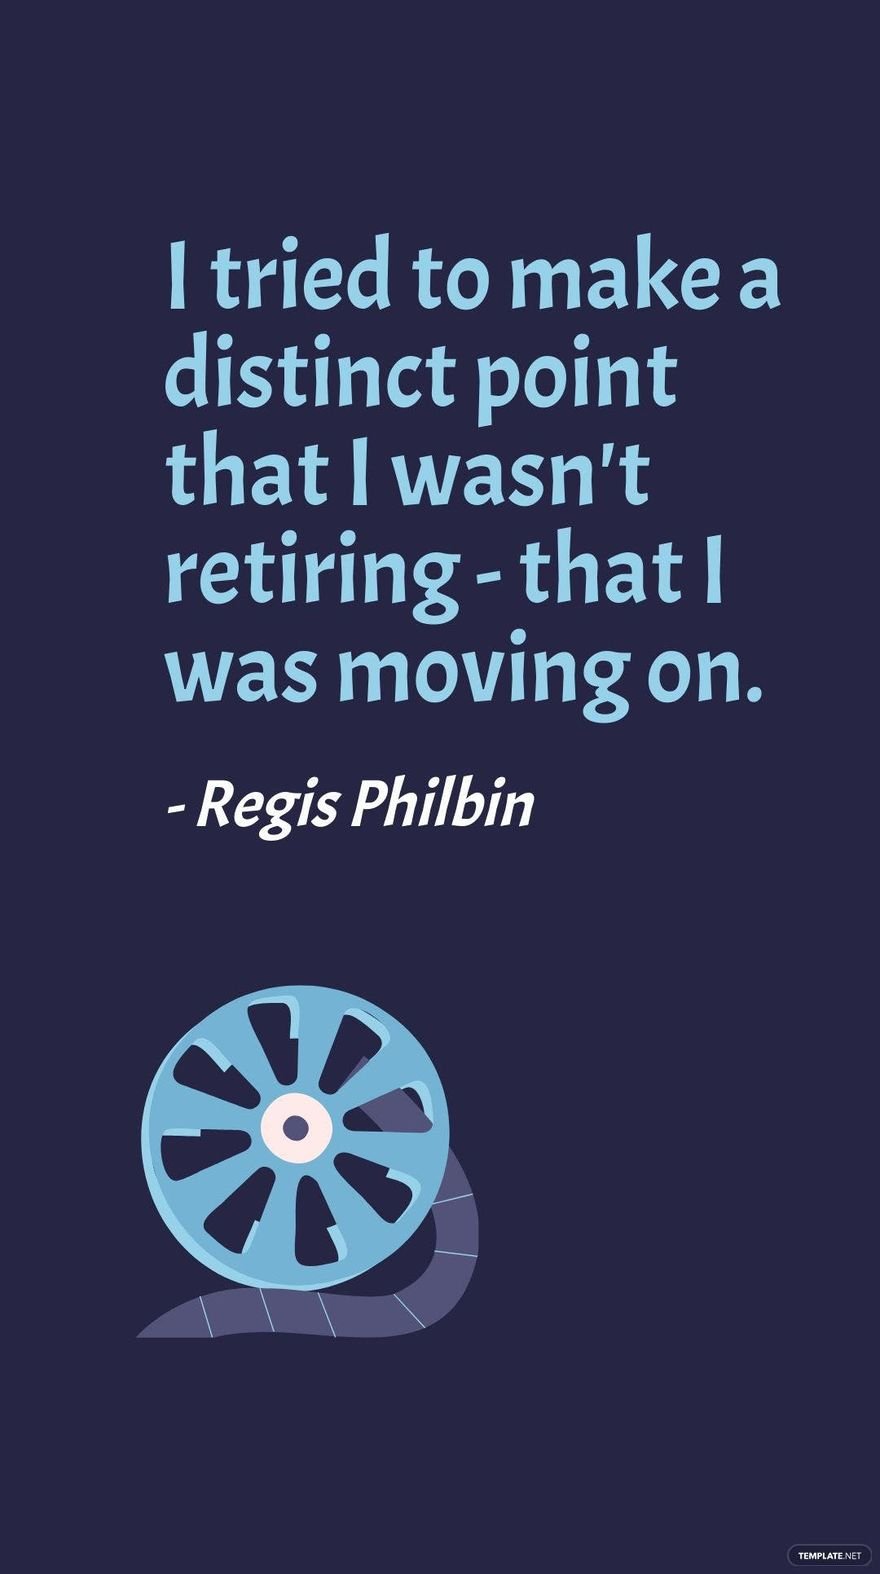 Regis Philbin - I tried to make a distinct point that I wasn't retiring - that I was moving on.